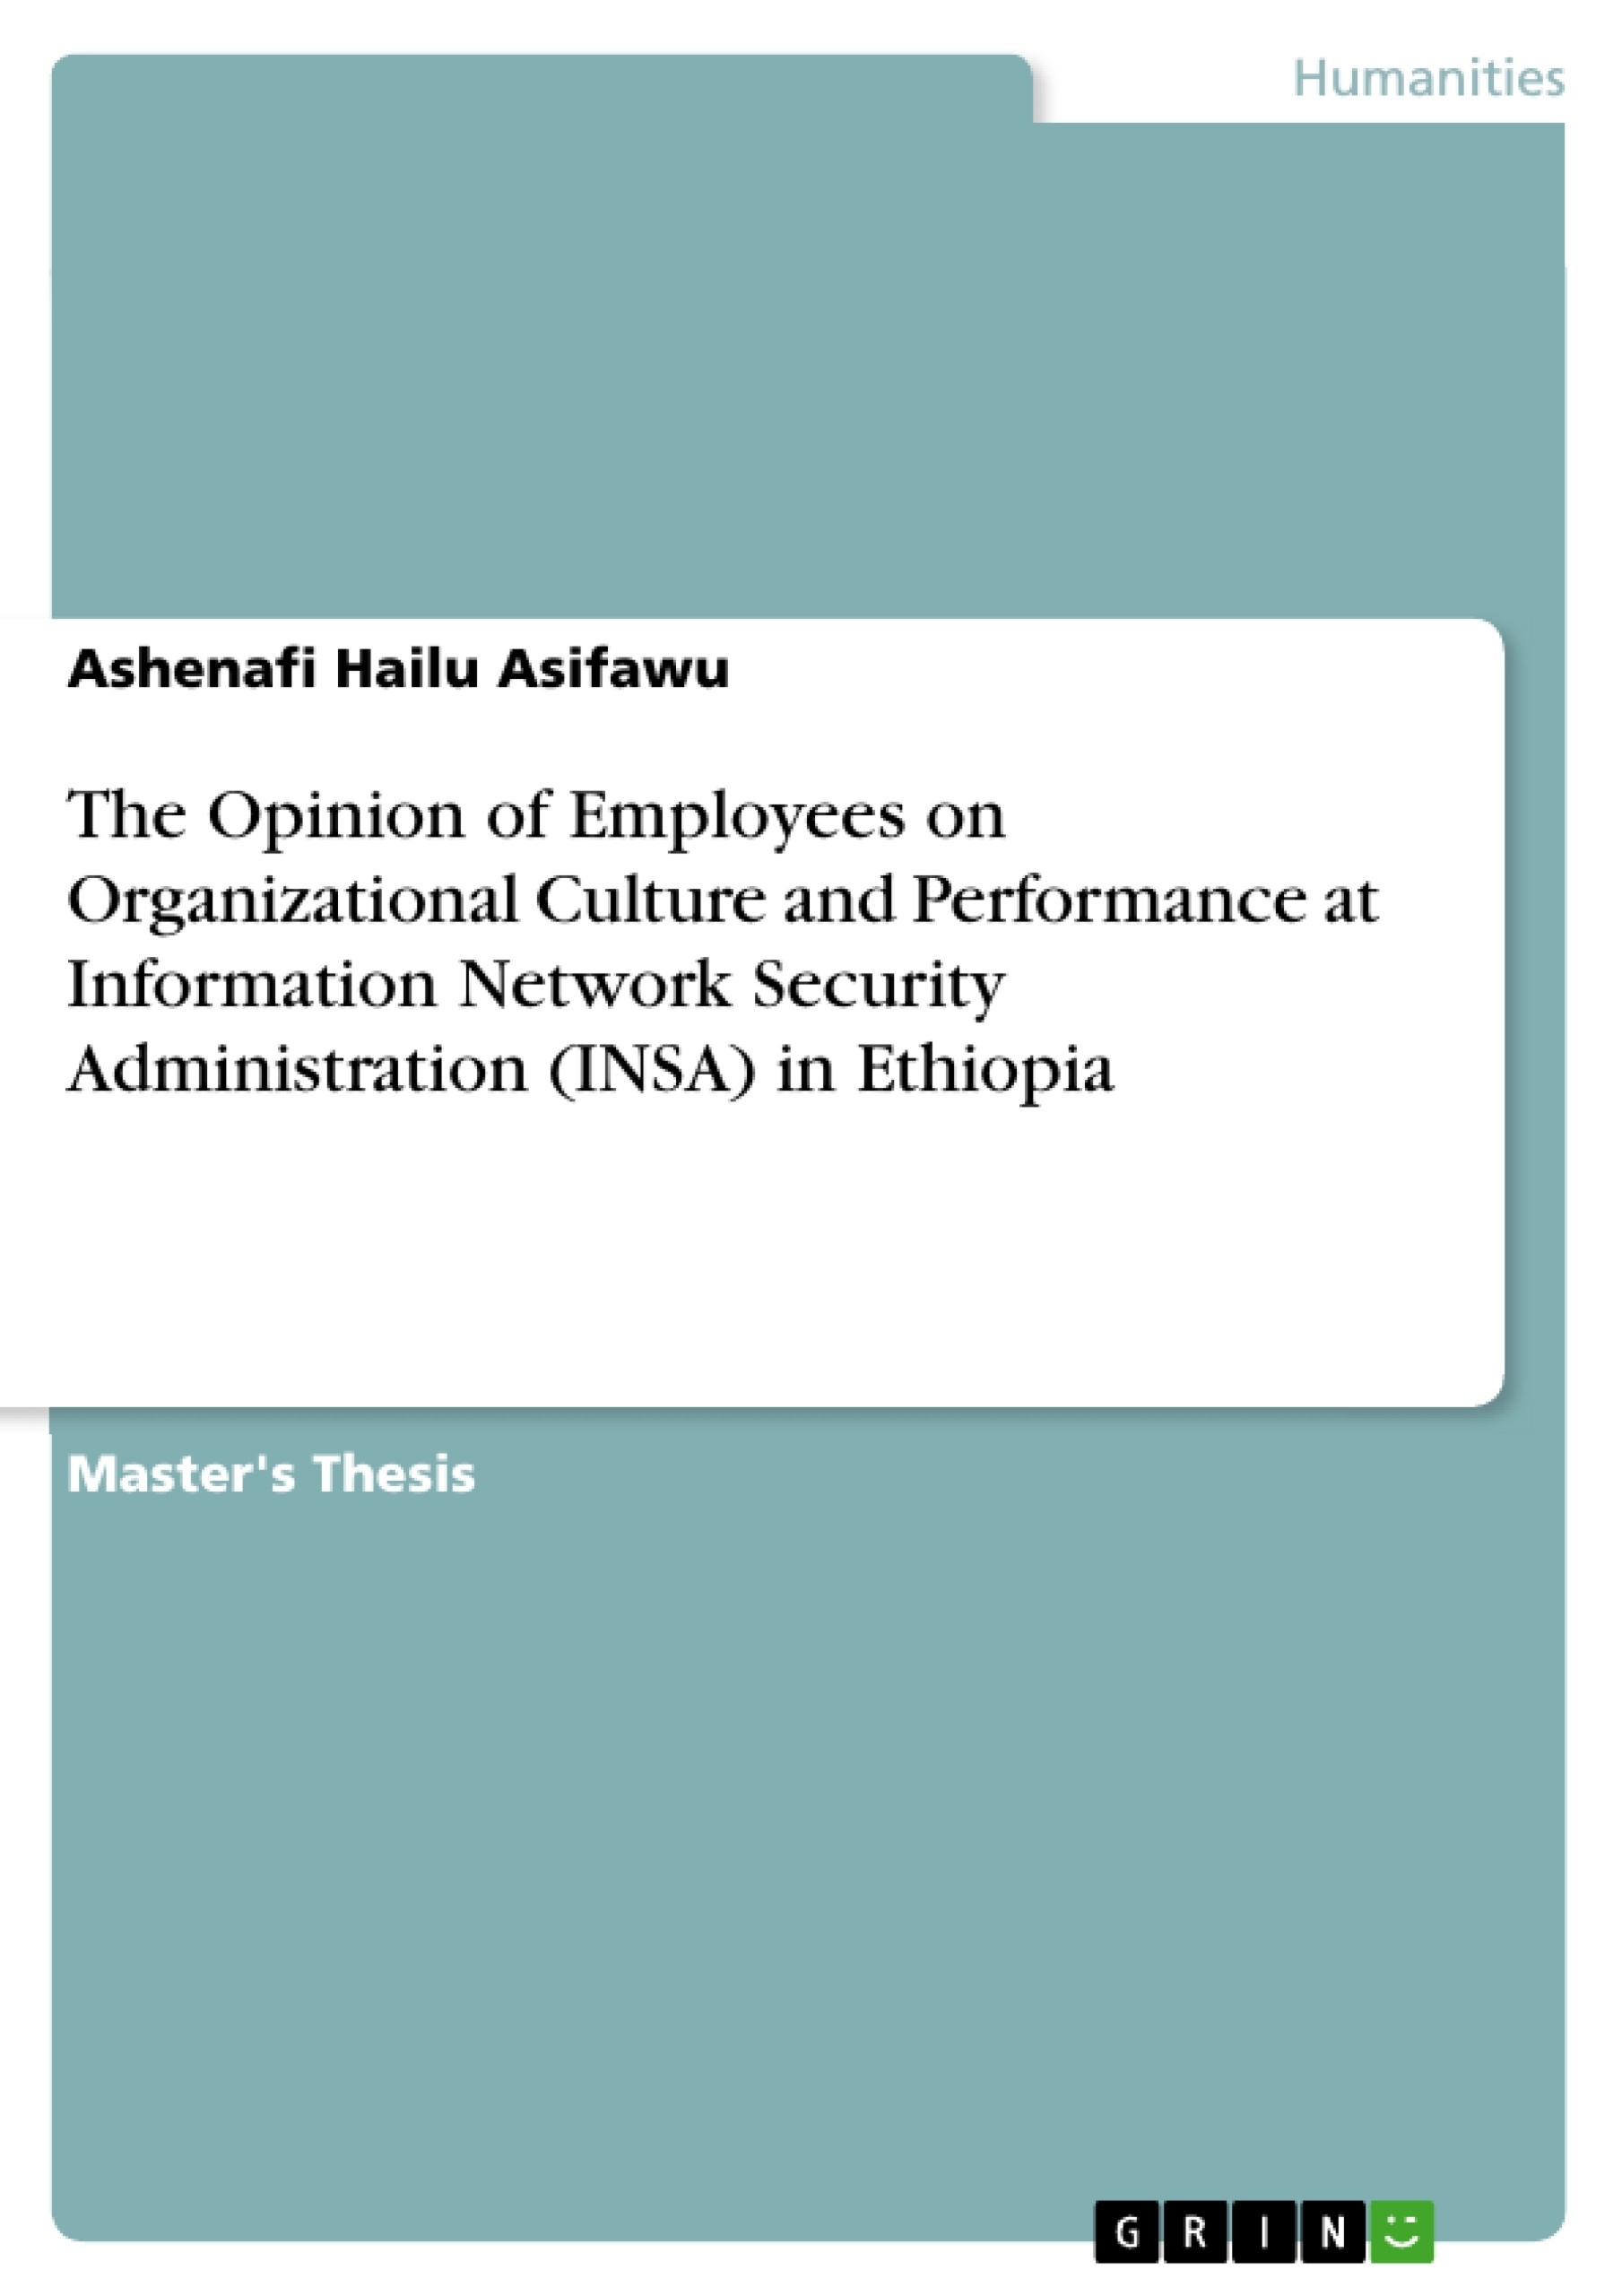 Titre: The Opinion of Employees on Organizational Culture and Performance at Information Network Security Administration (INSA) in Ethiopia